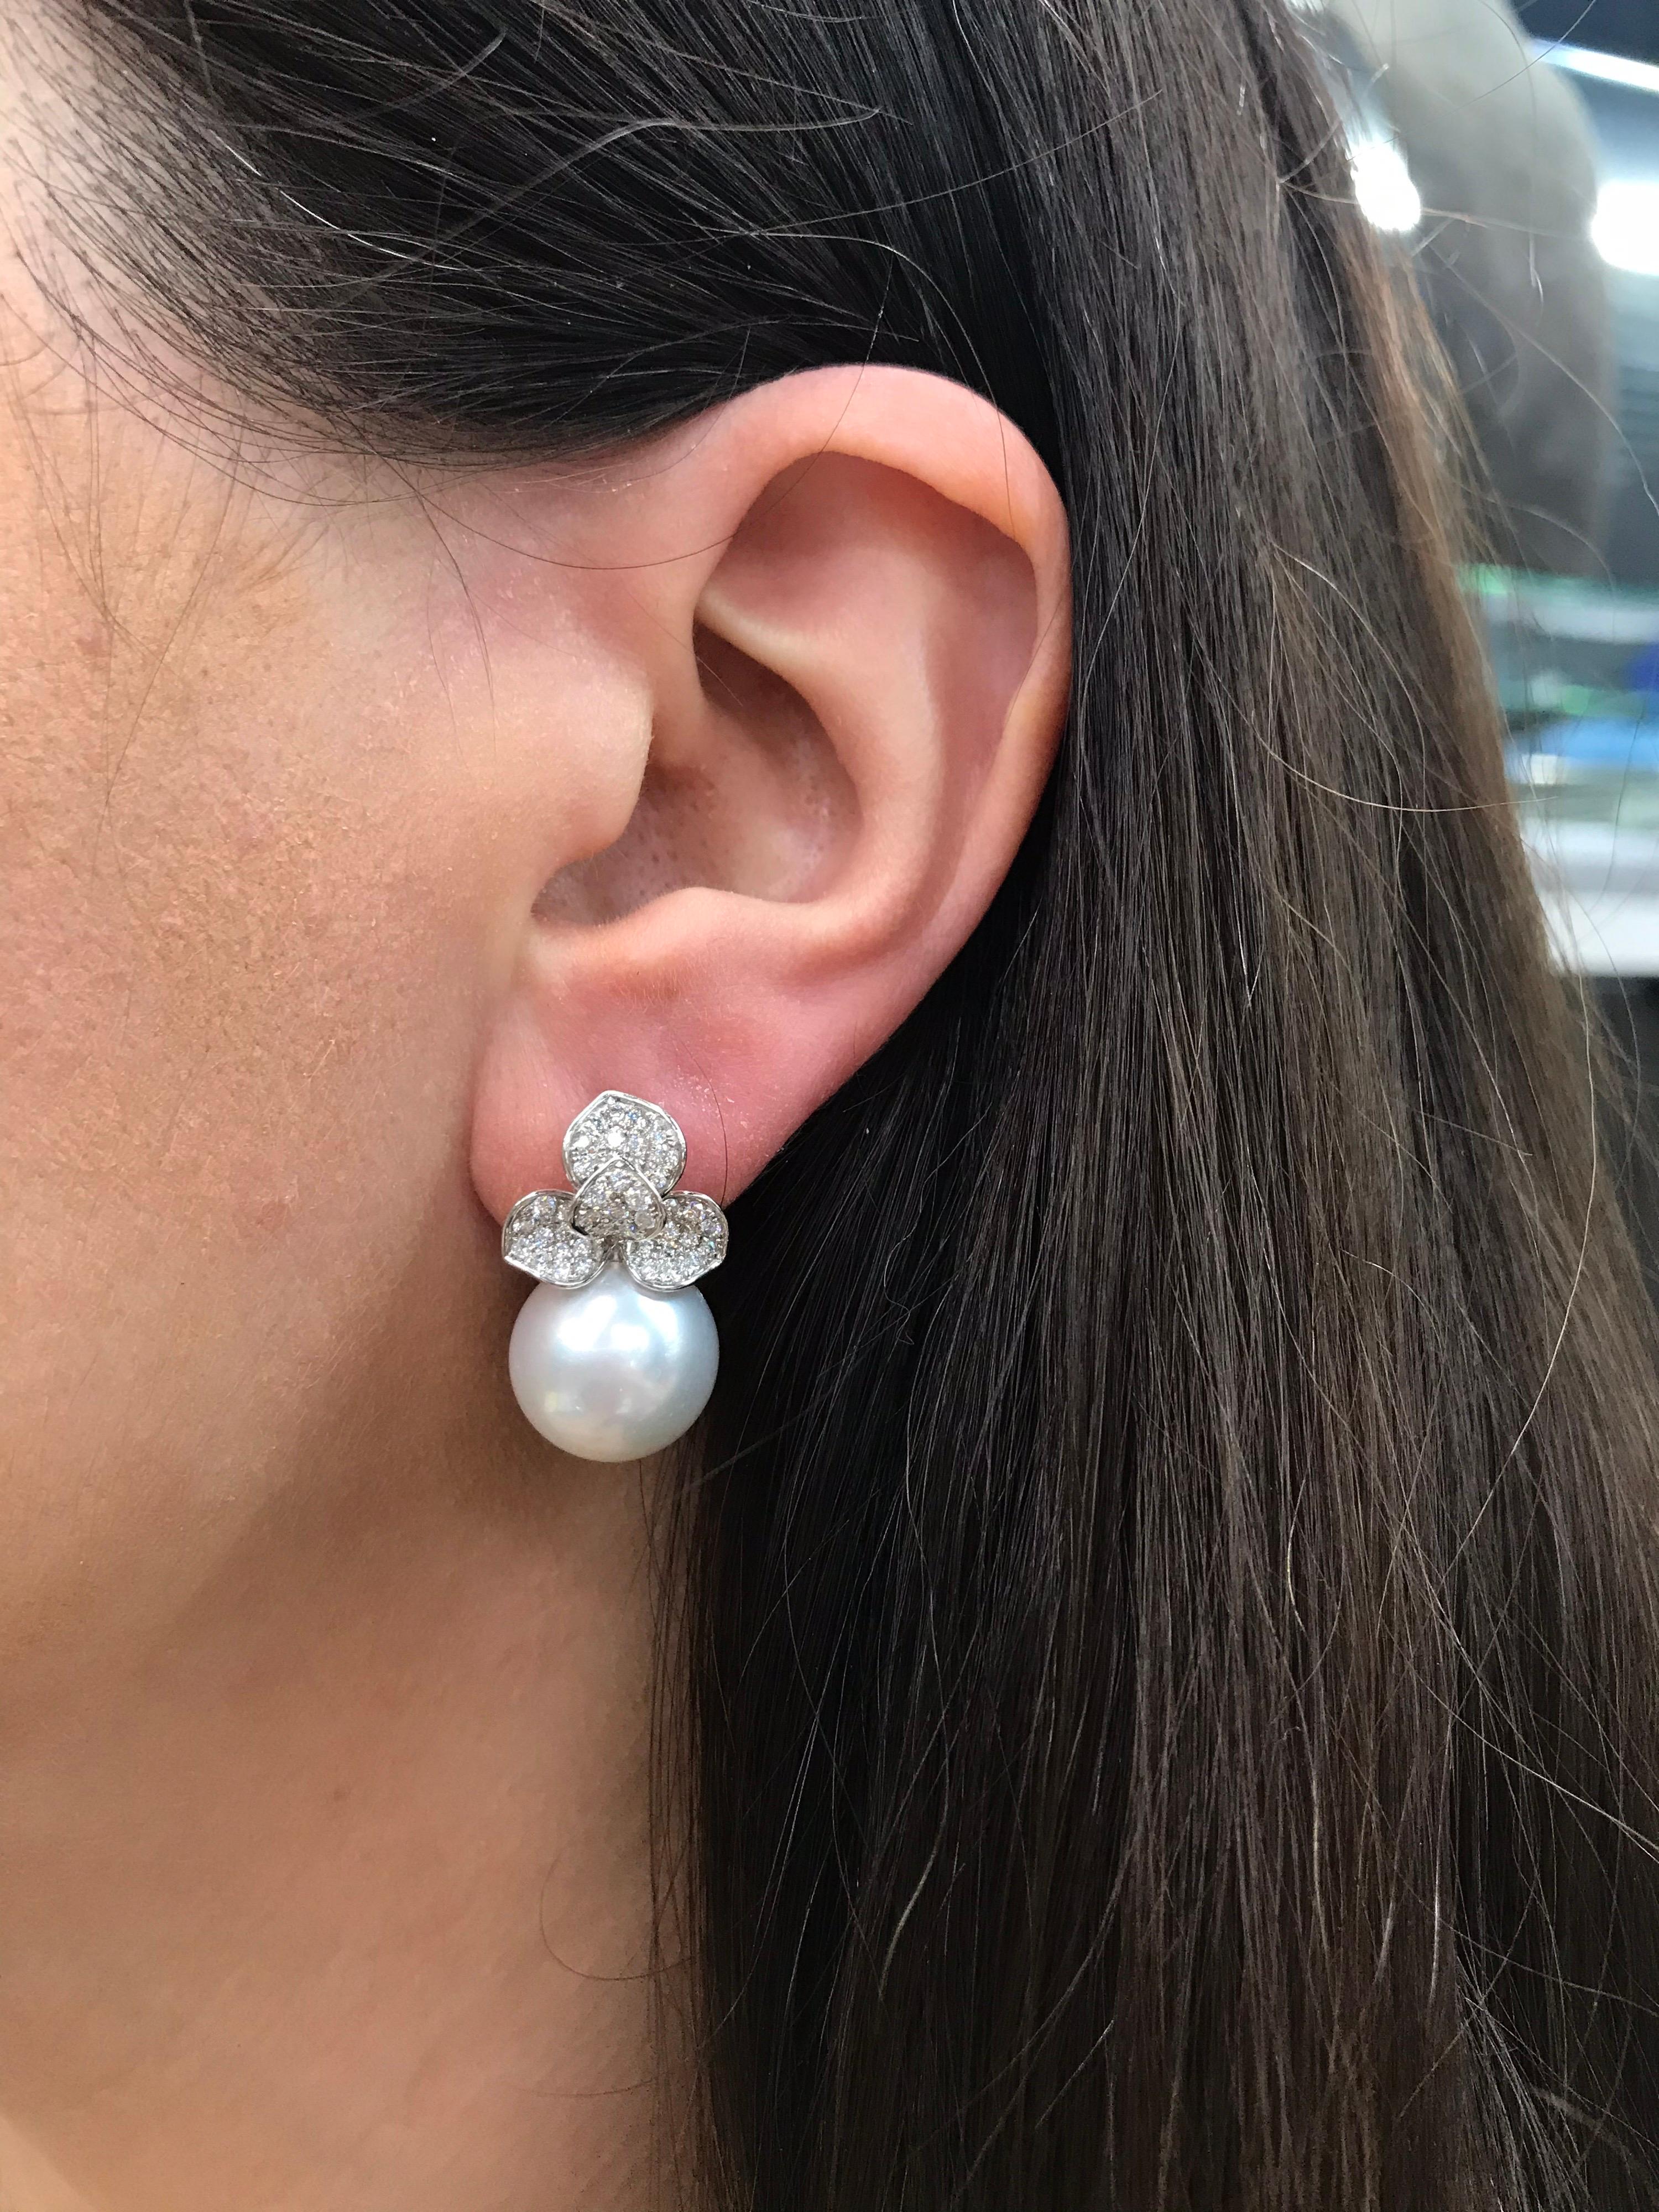 18K White gold petal drop earrings featuring two South Sea measuring 13-14 mm with 96 round brilliants weighing 0.98 carats. 
Color G-H
Clarity SI